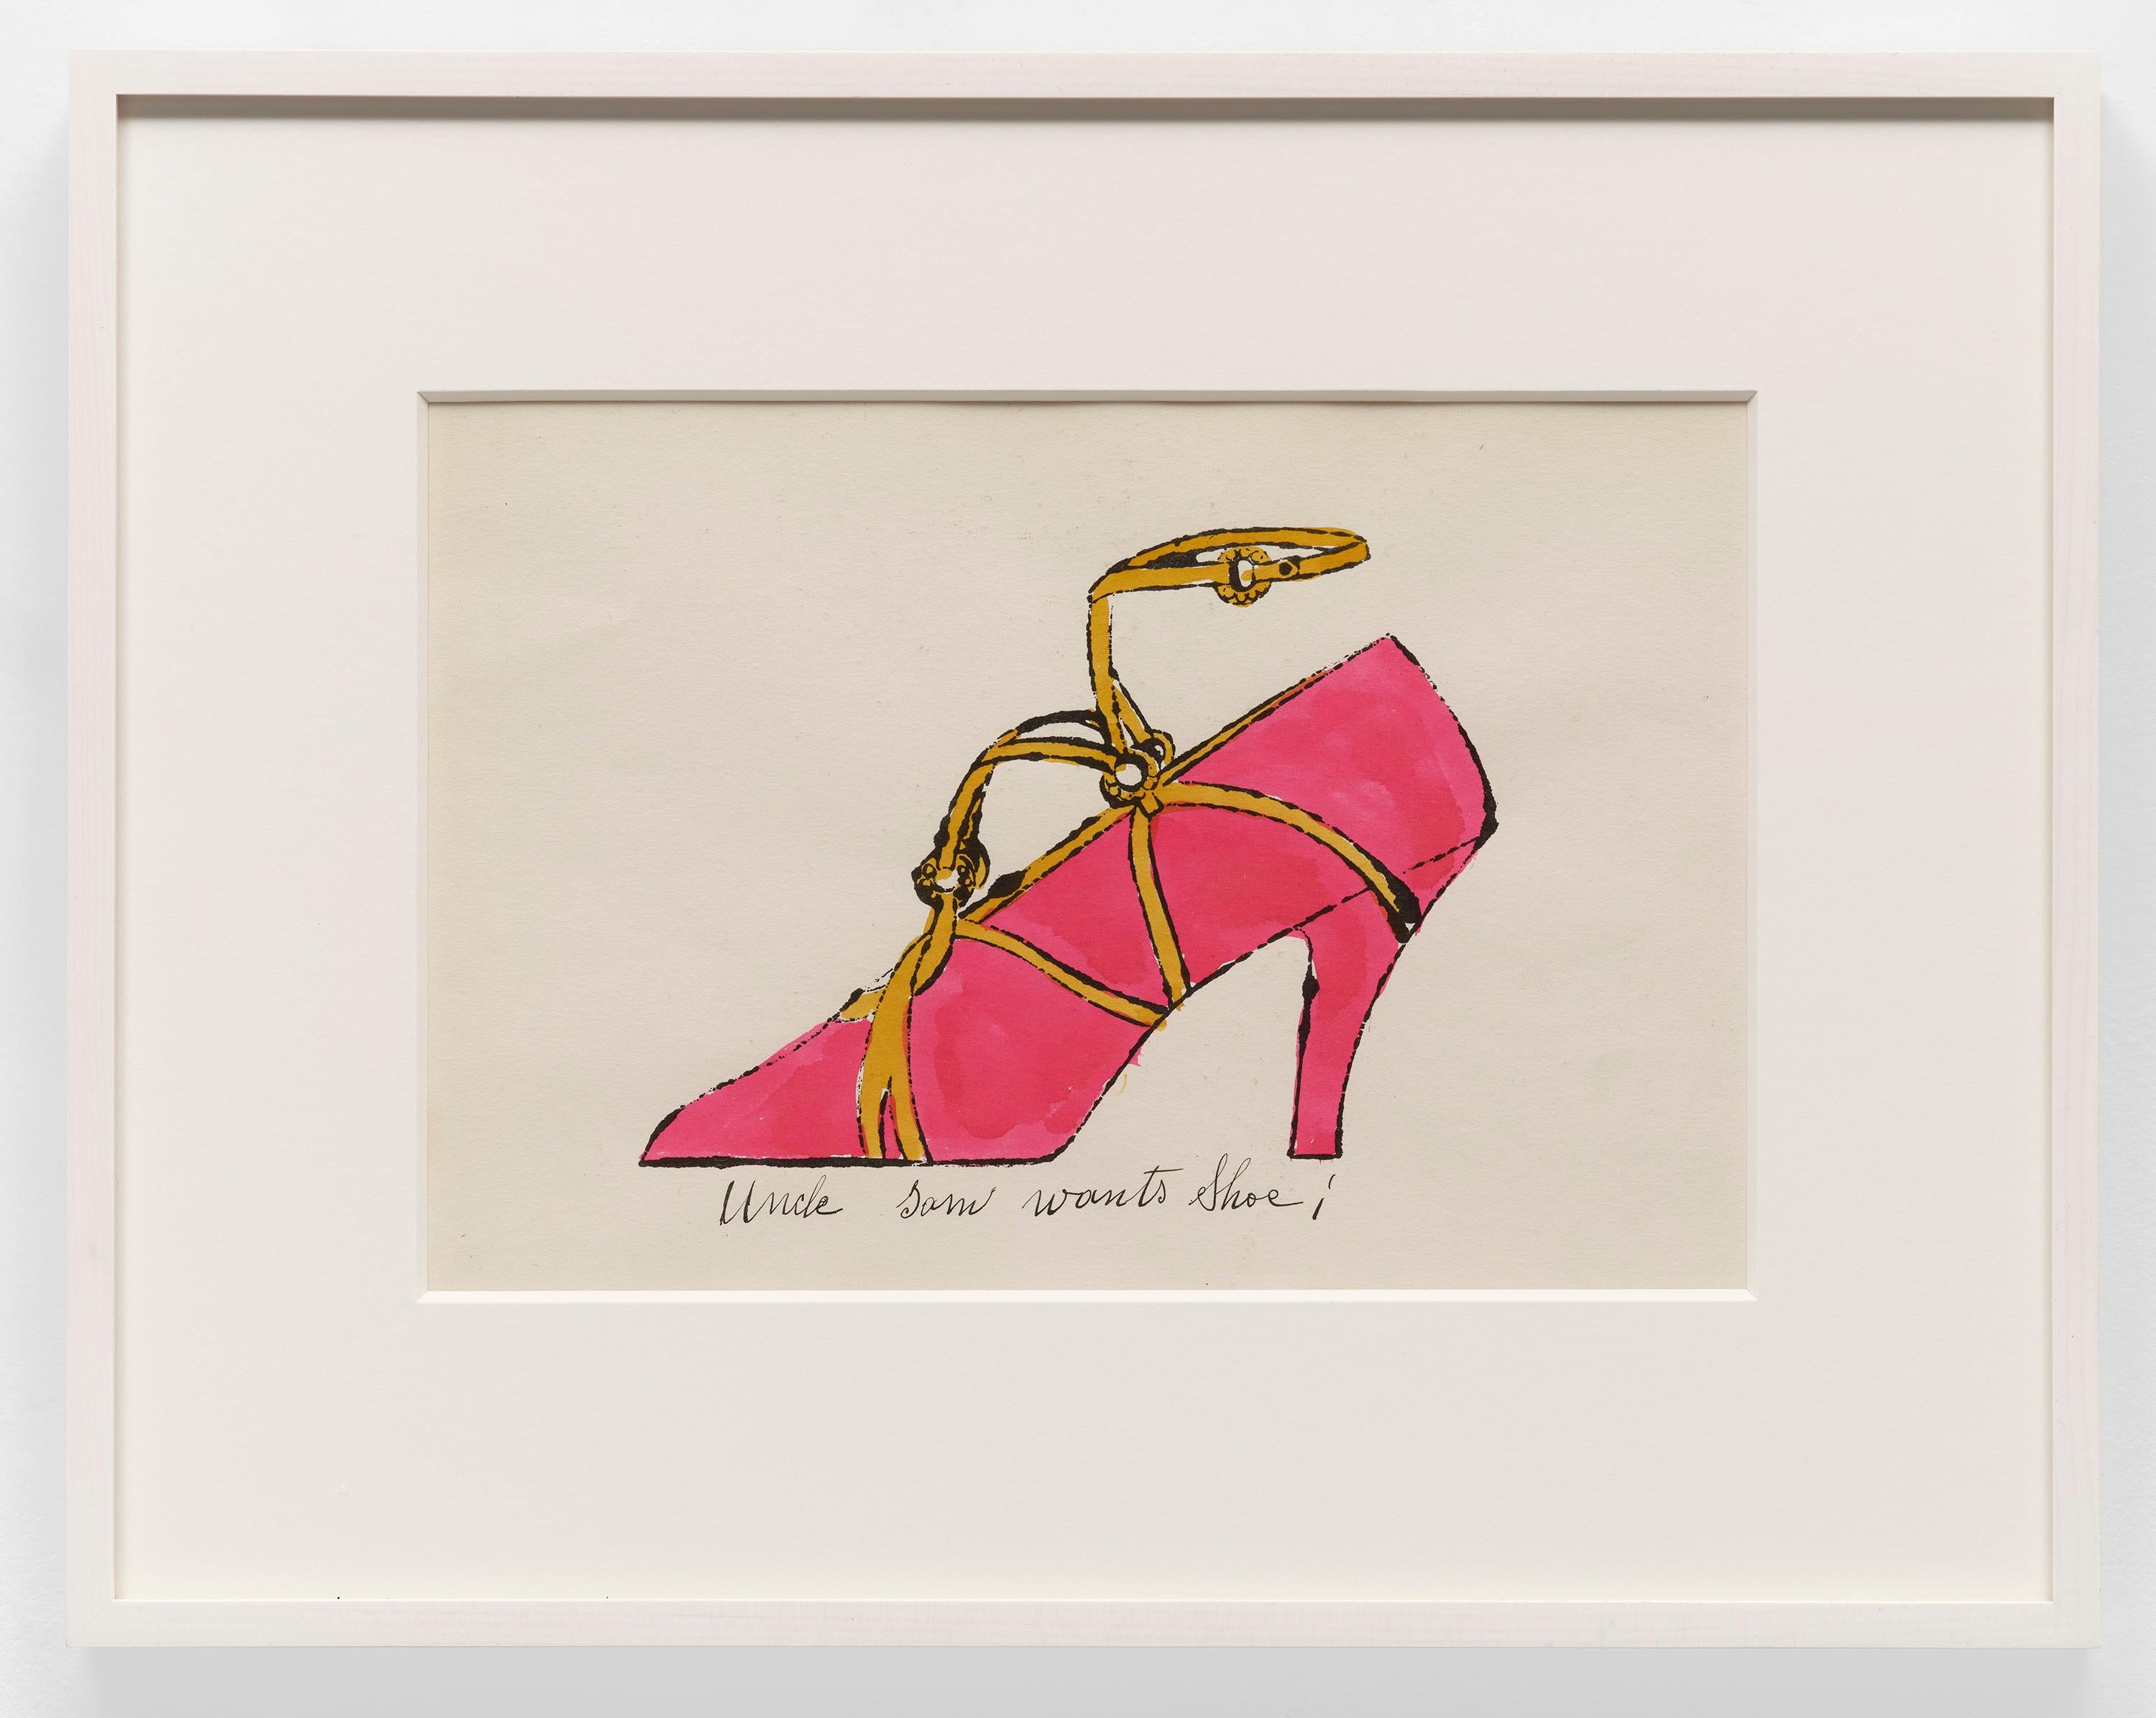 Frame size: 14 3/4 x 19 inches
Stamped on verso by The Estate of Andy Warhol and The Warhol Foundation